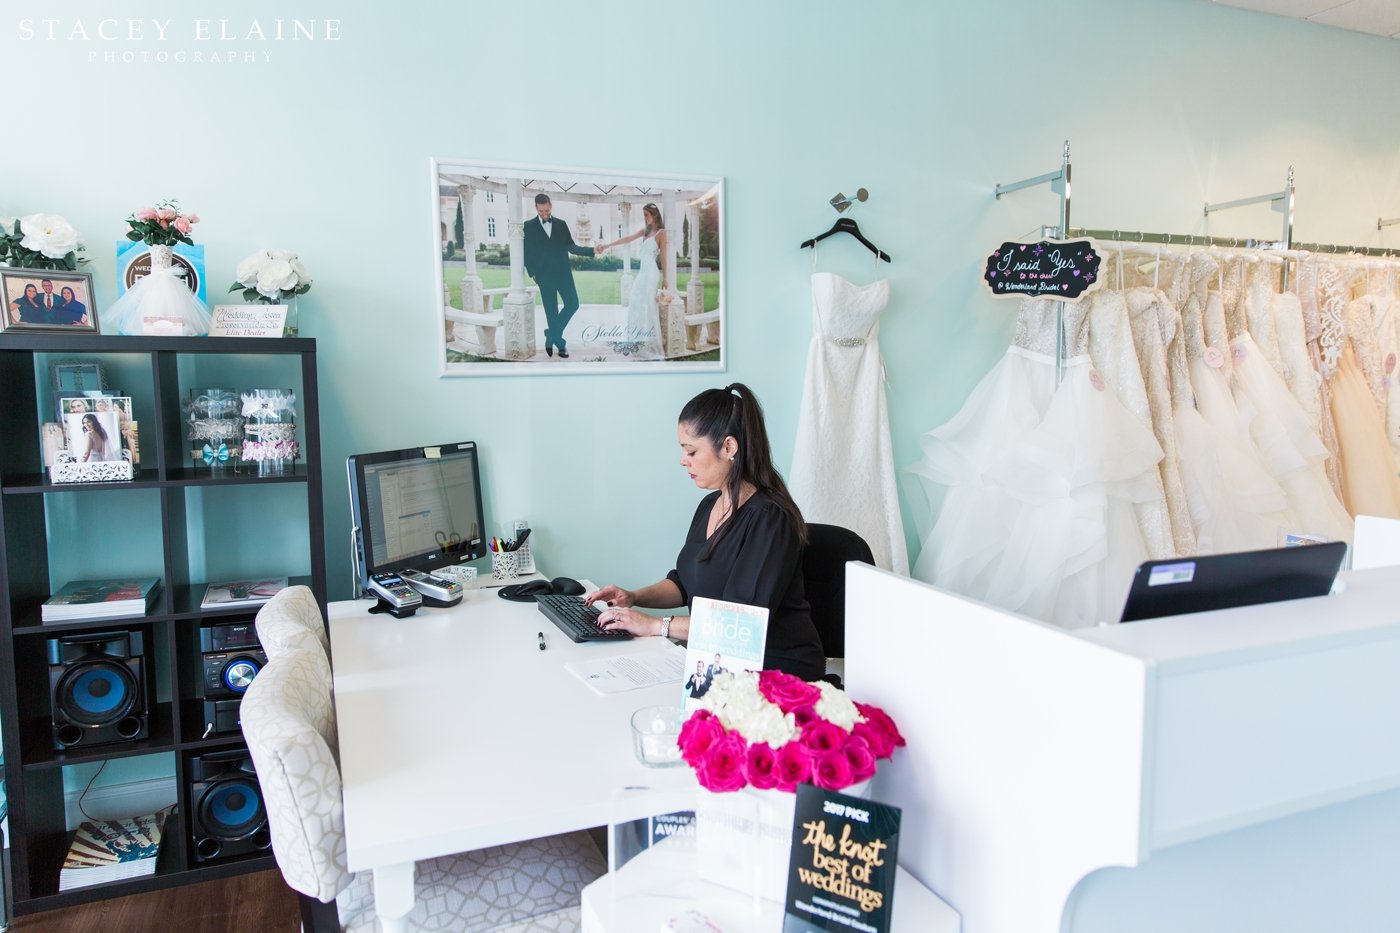 View More: http://staceyelainephotography.pass.us/wonderland_trunk_show_march